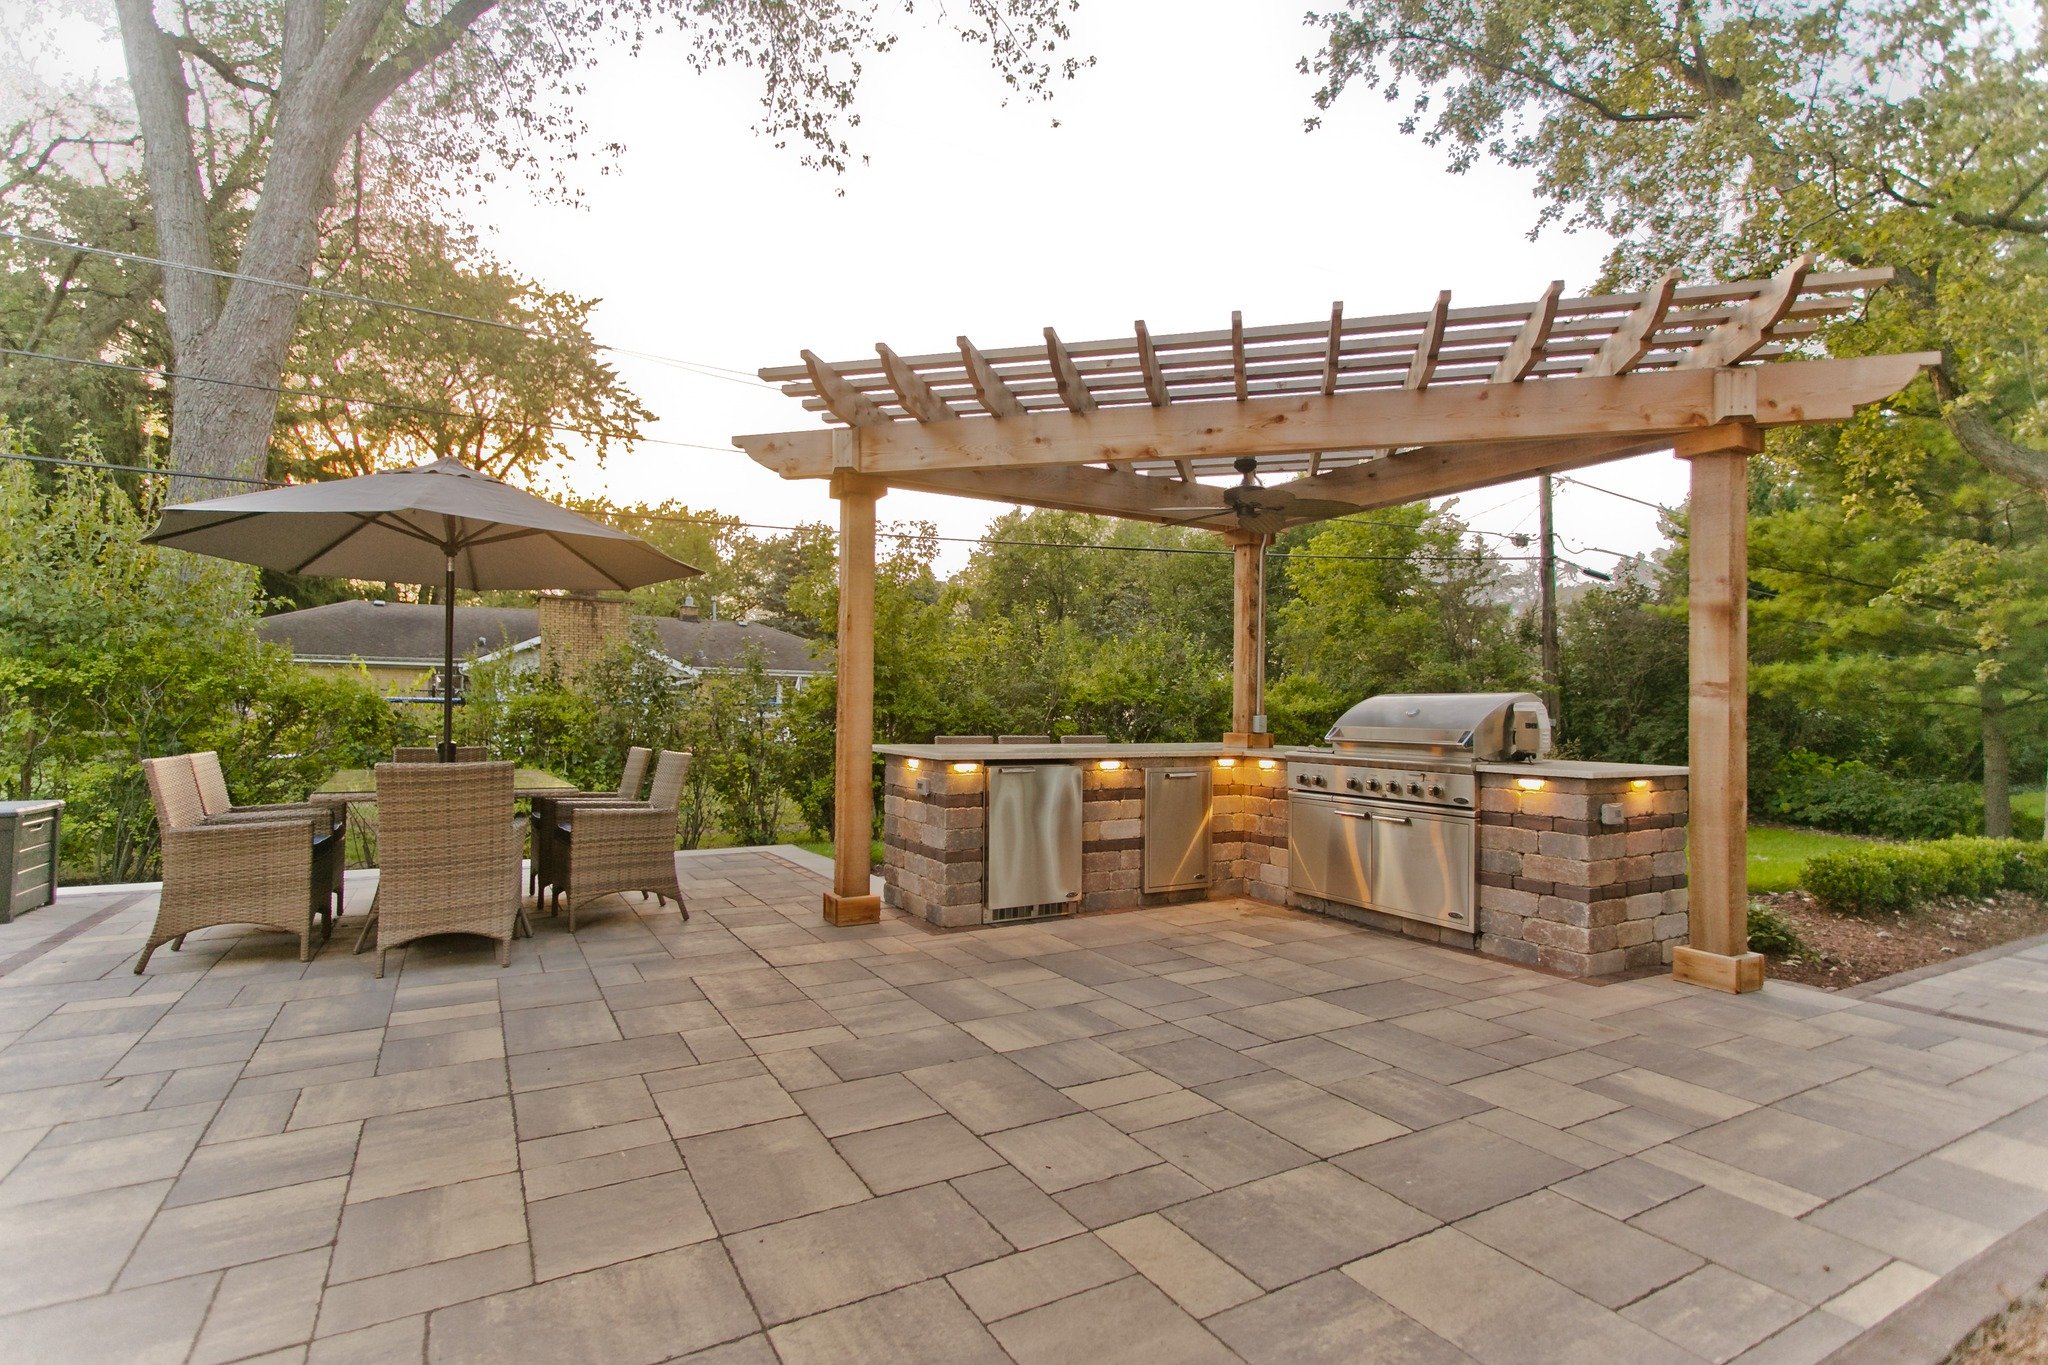 Summer Cookouts are just around the corner! Let us build your dream outdoor kitchen.